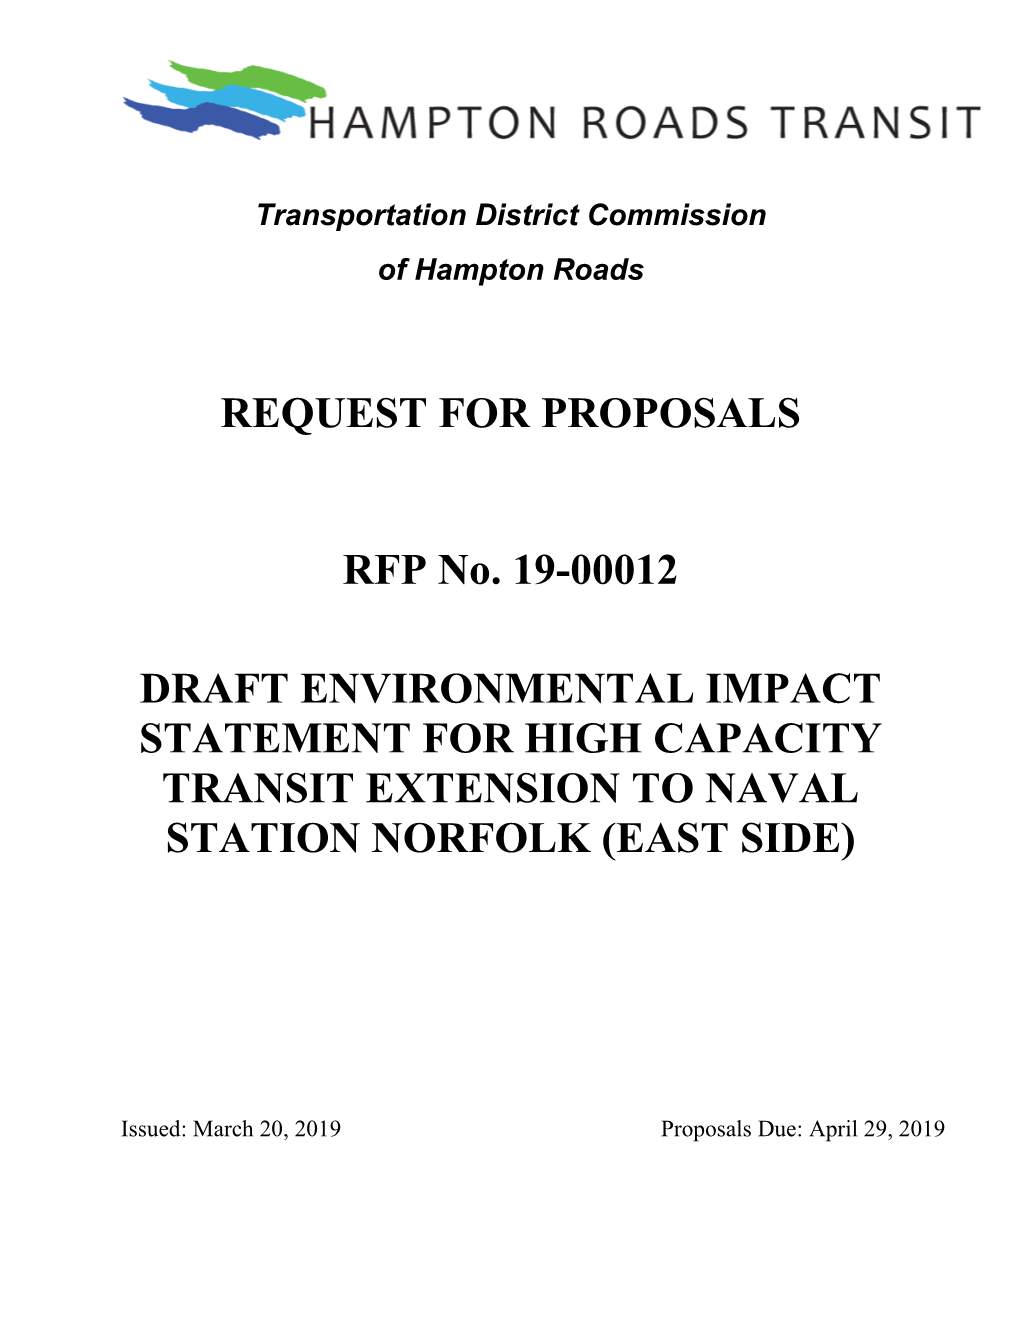 REQUEST for PROPOSALS RFP No. 19-00012 DRAFT